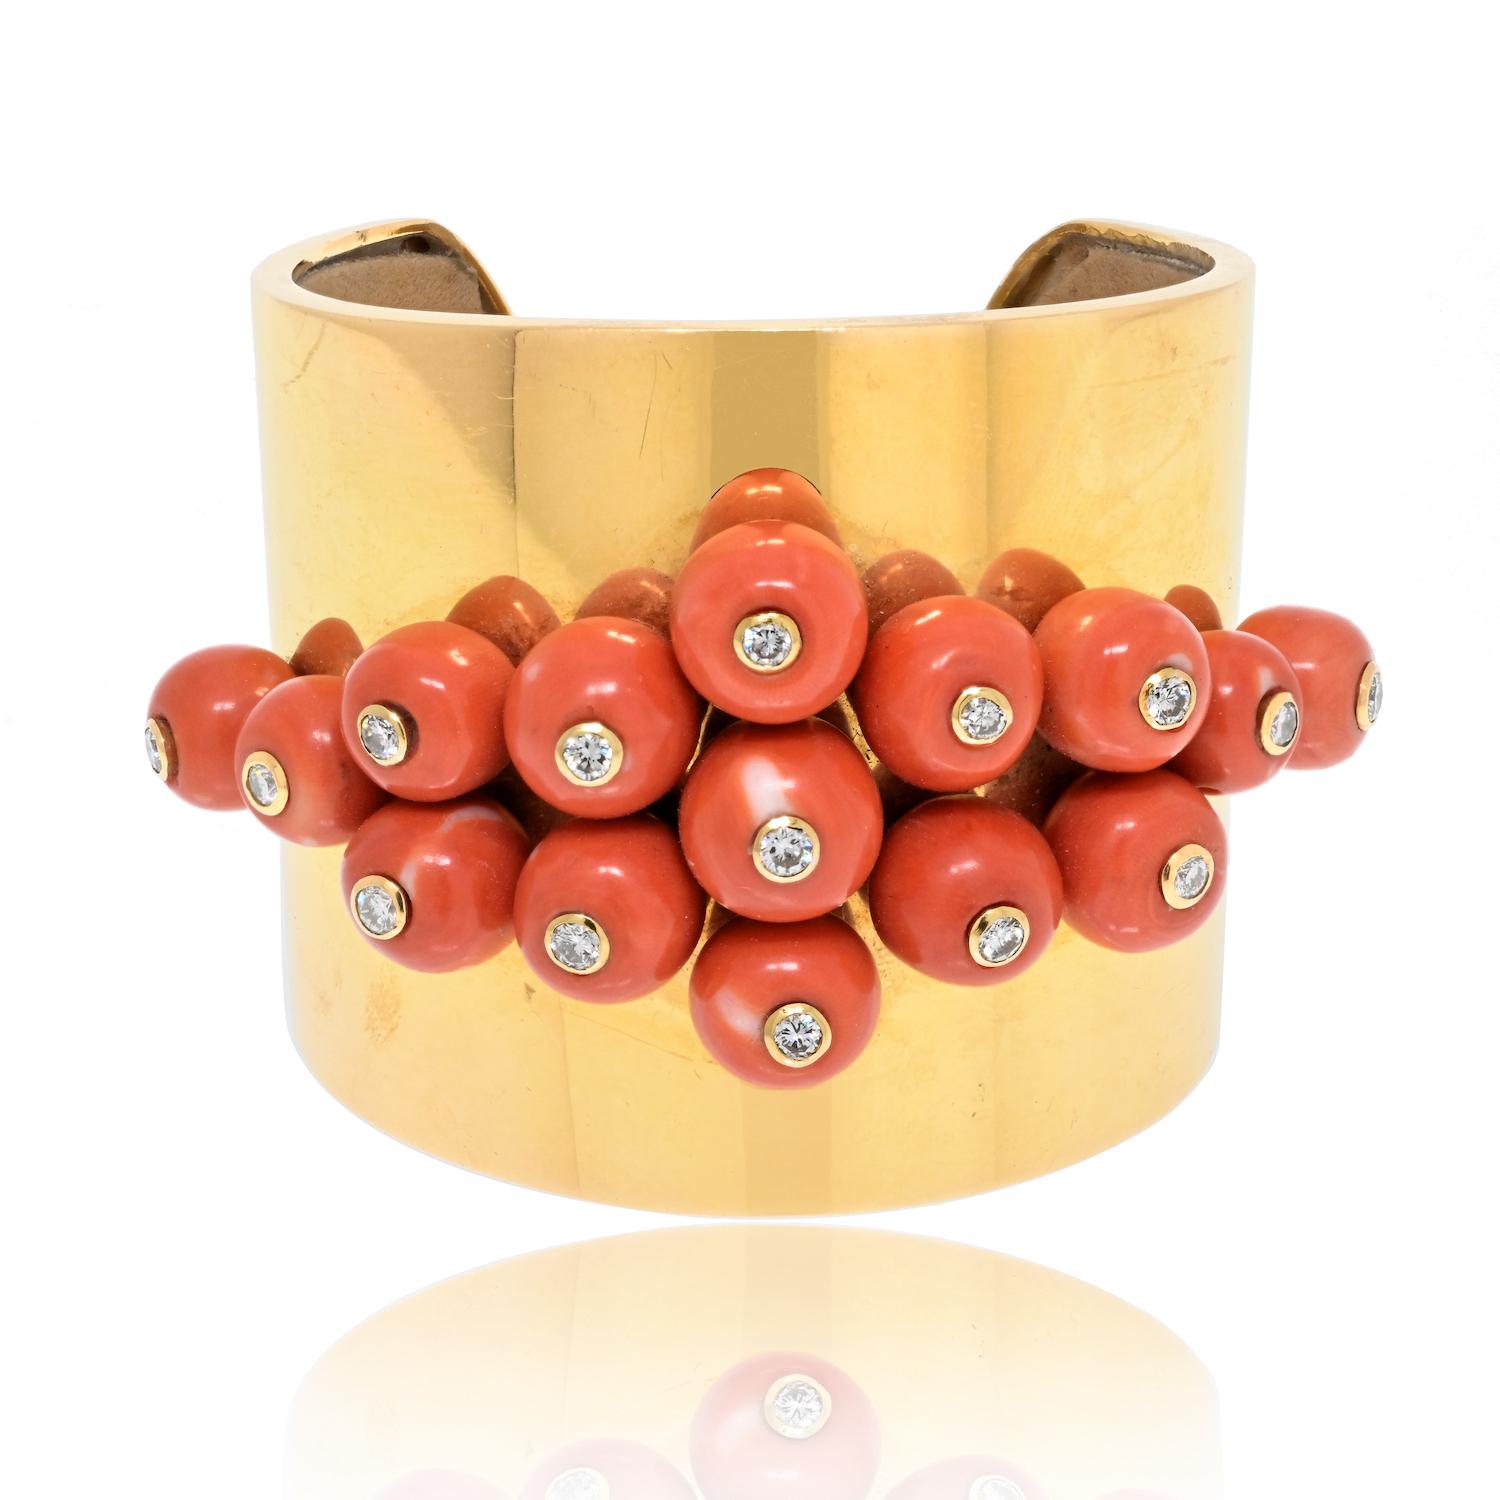 This beautiful cuff bangle is something that you won't find in the fine jewelry they make today. This cuff bangle bracelet circa 1960's is made of solid yellow gold, firmly encrusted with bead style coral, that is further studded with round cut